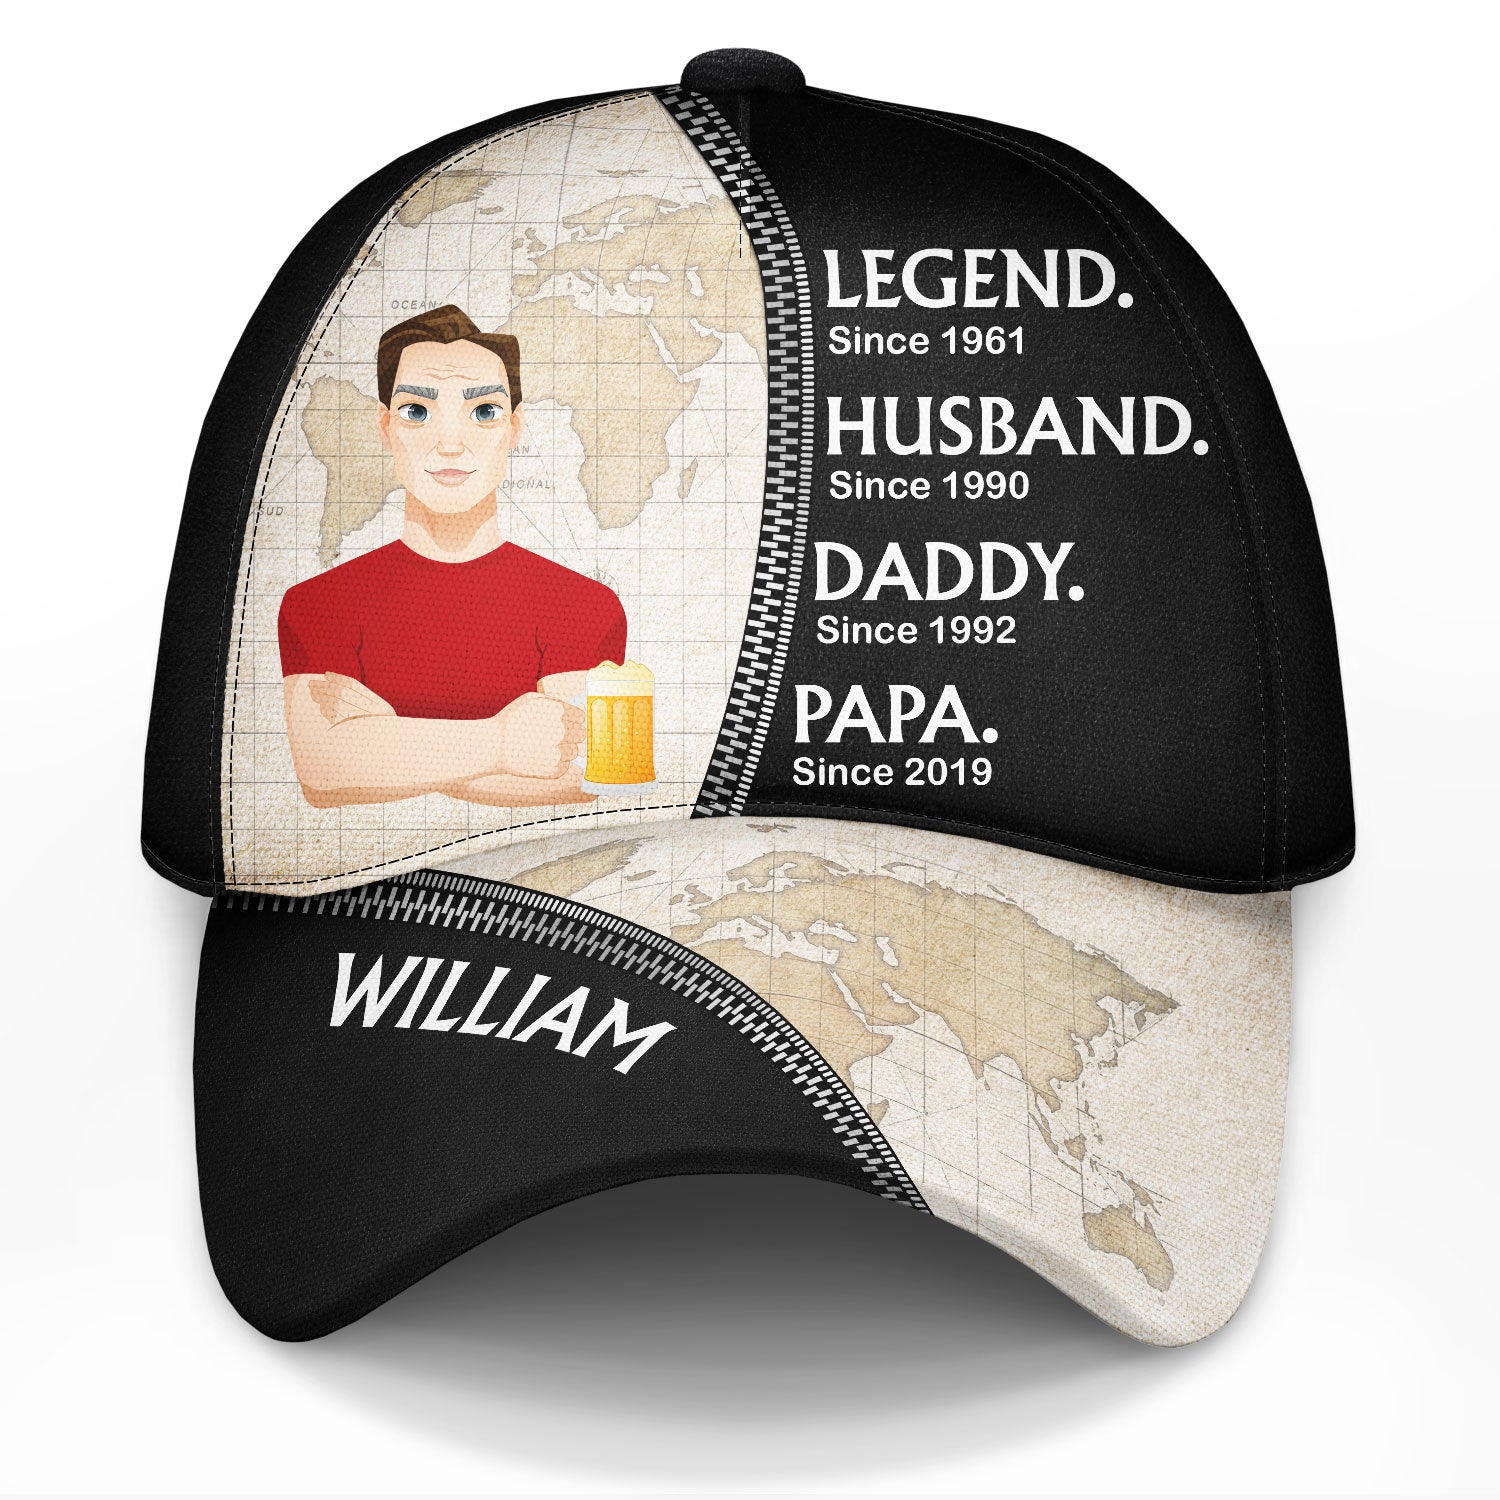 Legend Husband Daddy - Gift For Father - Personalized Classic Cap